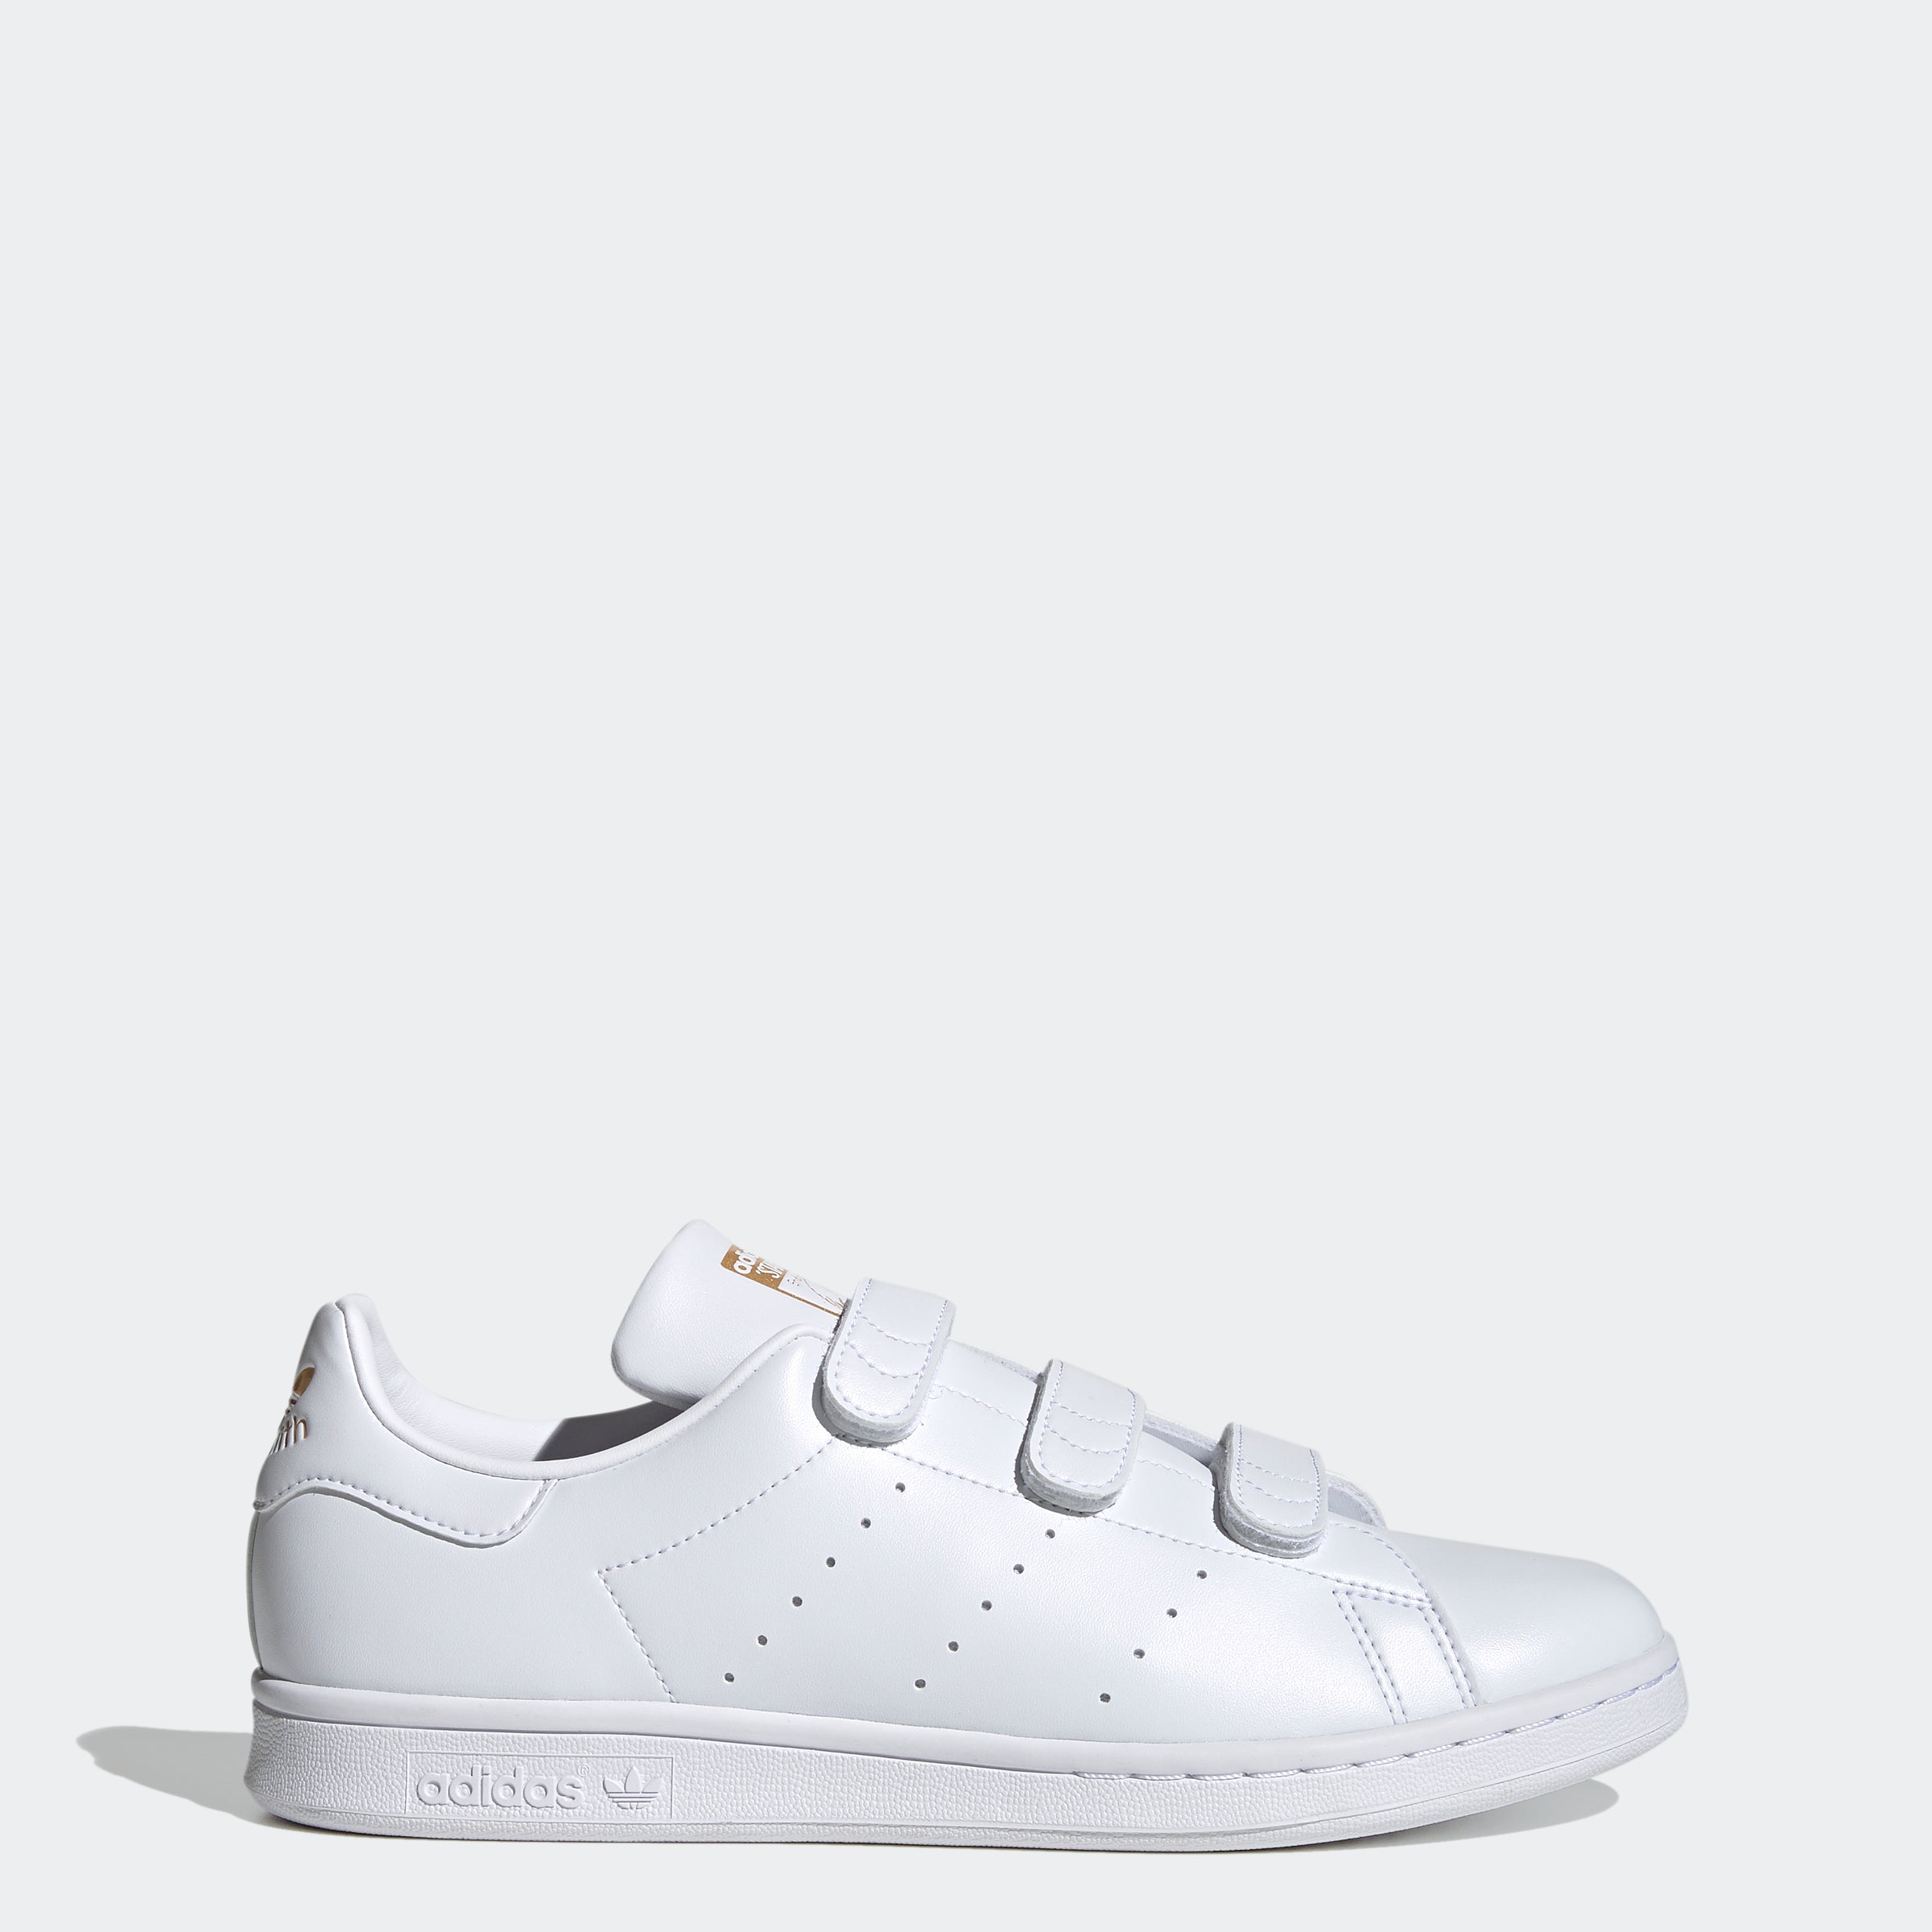 Kwalificatie Beringstraat Mysterieus Men's adidas Stan Smith Shoes White FX5508 | Chicago City Sports